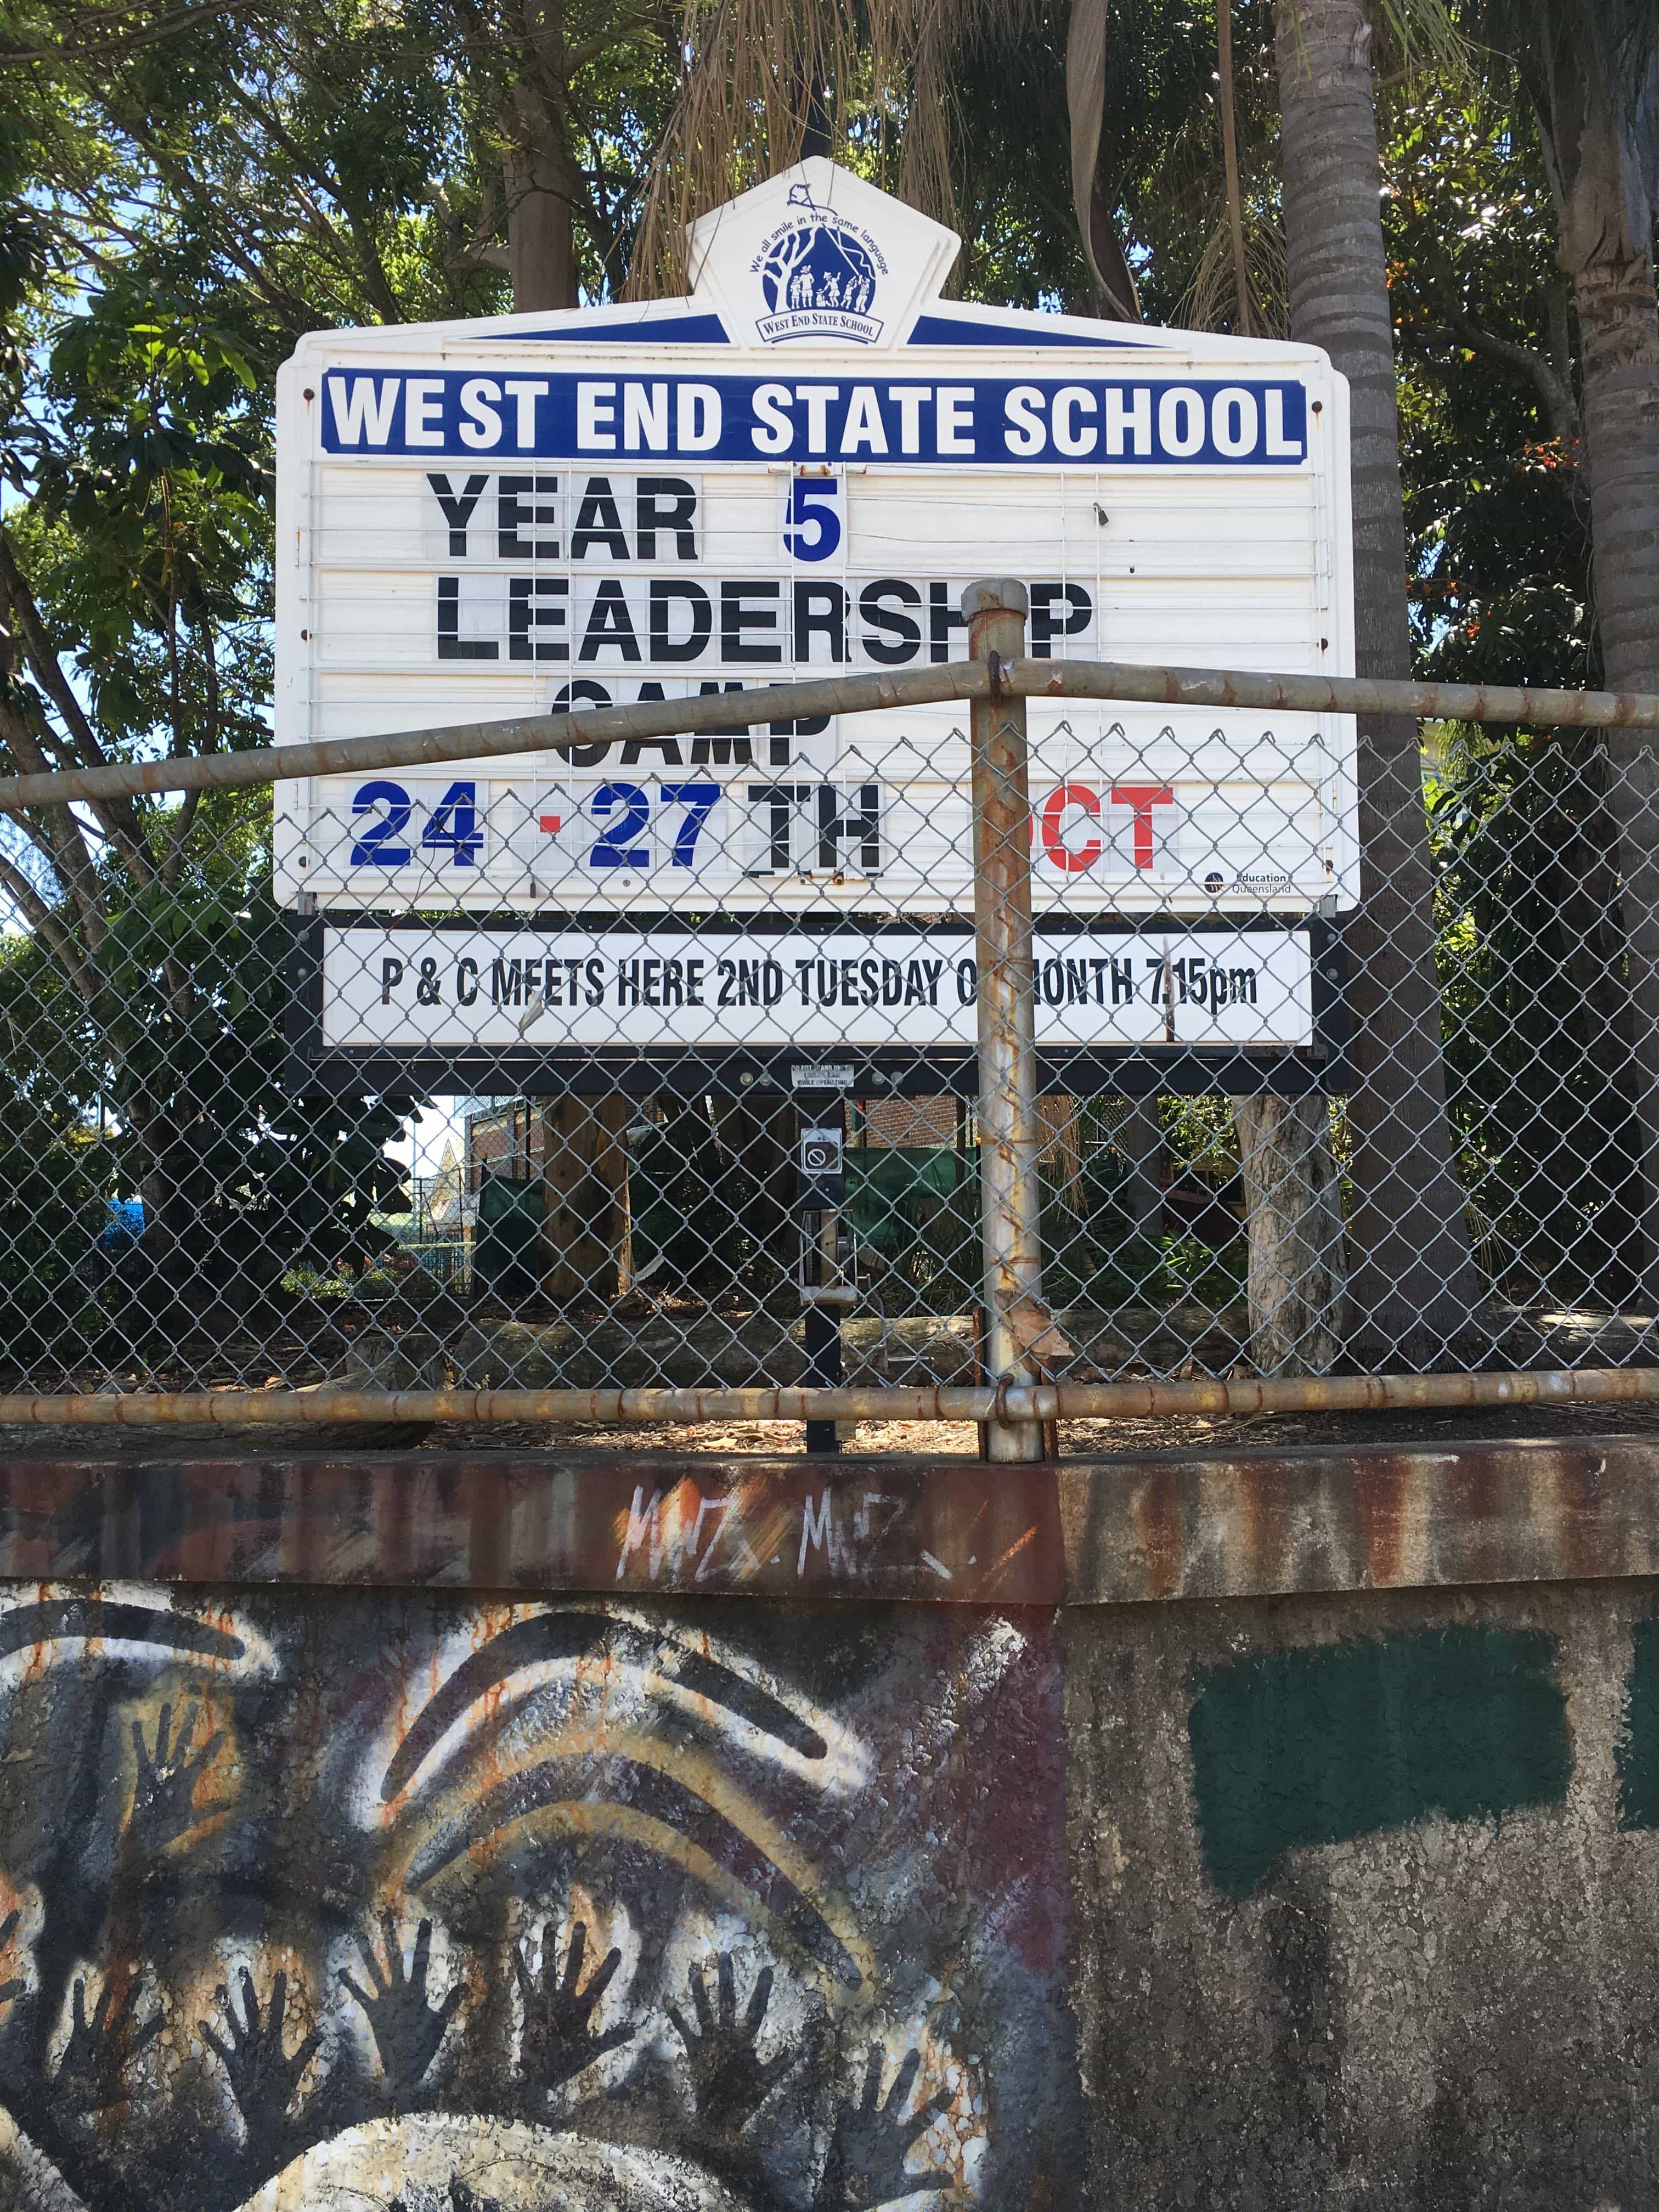 West End State School is across the road from Bohemia. Photo taken by Property Mash.